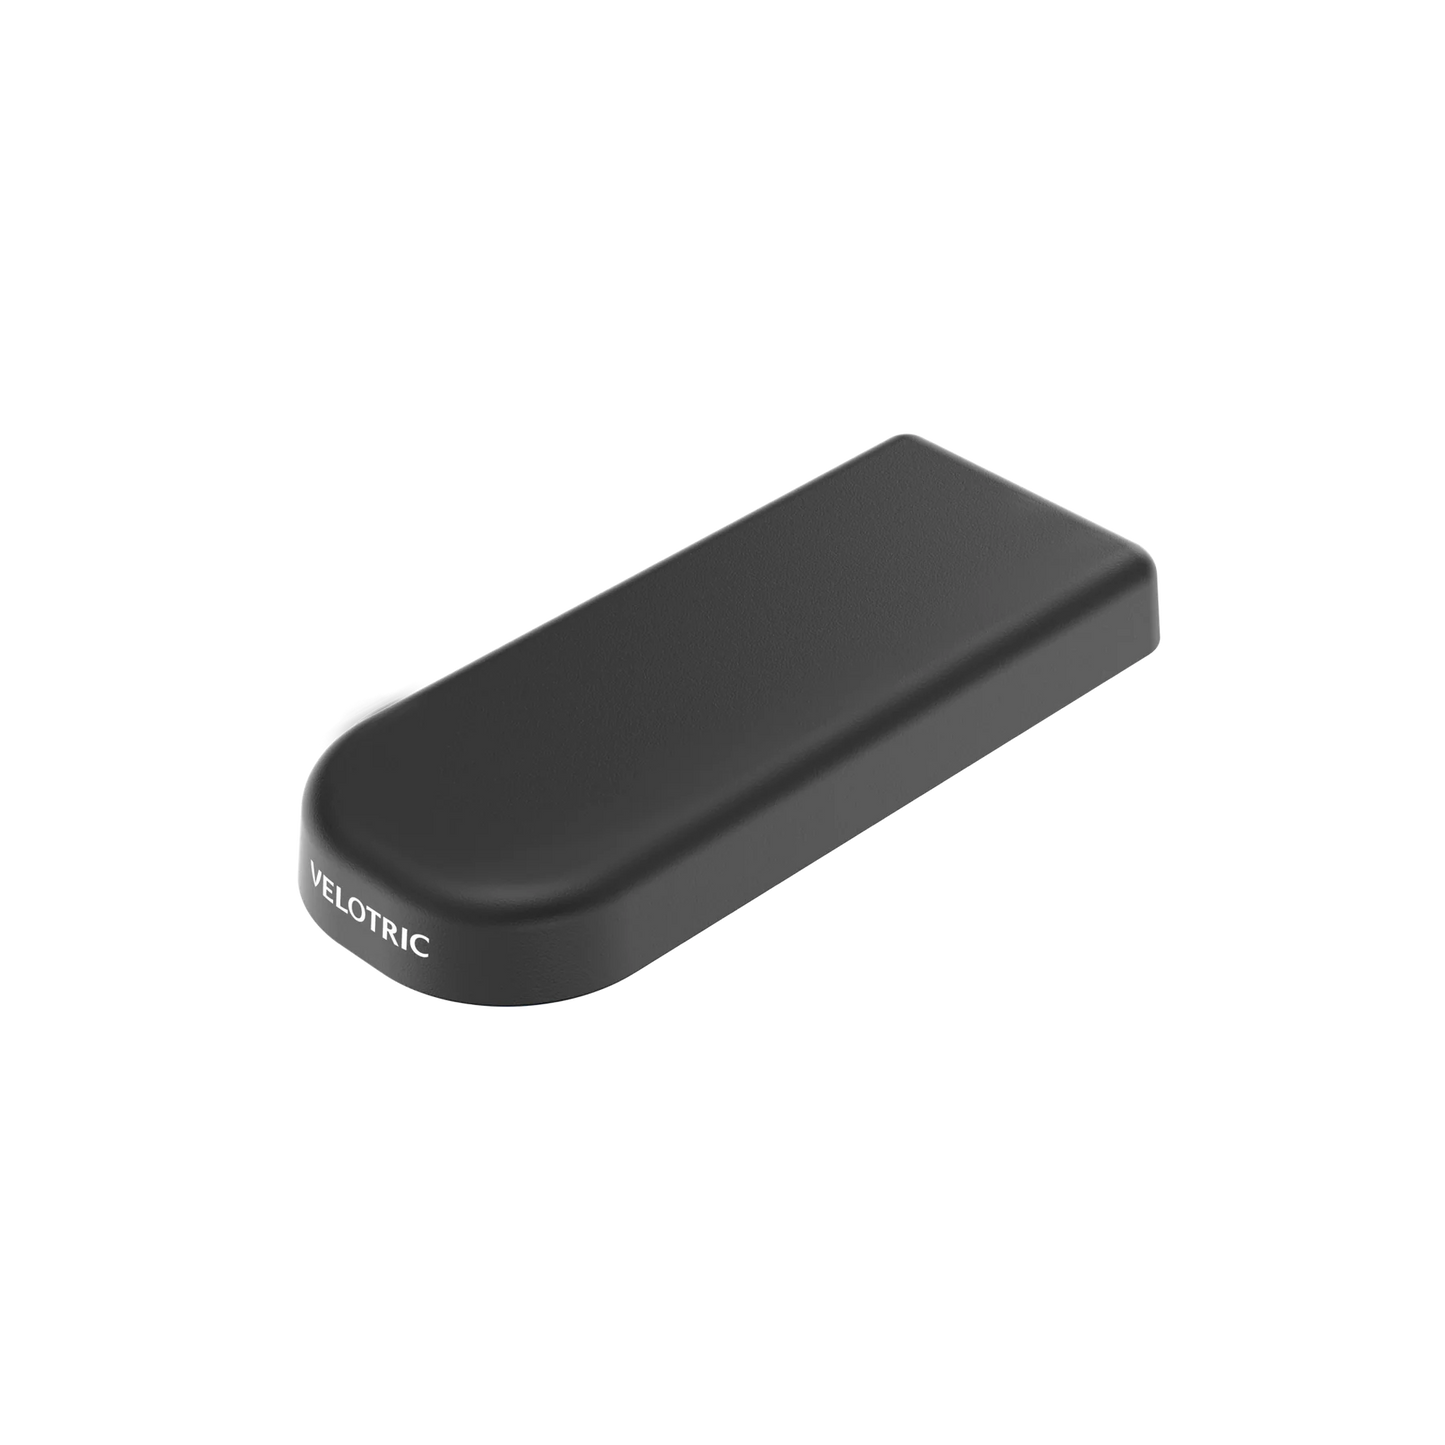 A black rectangular device with the product name "Seat Pad - Velotric Go / Fold" on one end, featuring a high-elastic sponge seat pad for added comfort.